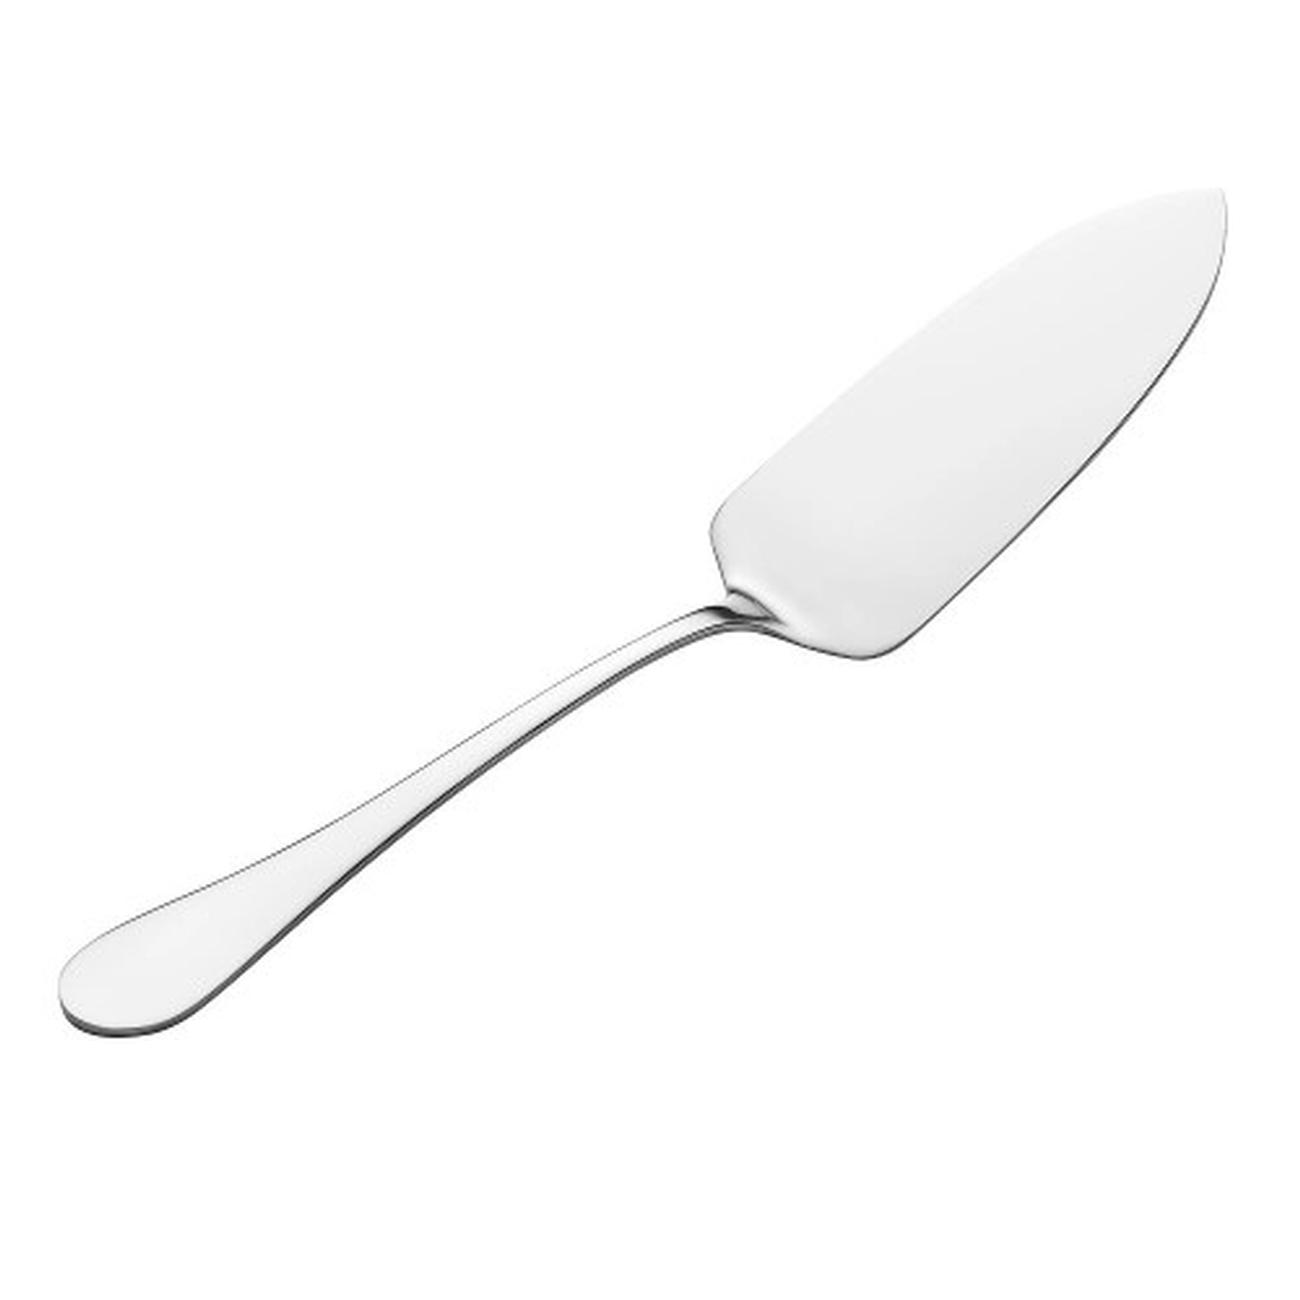 viners-select-stainless-steel-cake-server-giftbox - Viners Select 18.0 Cake Server